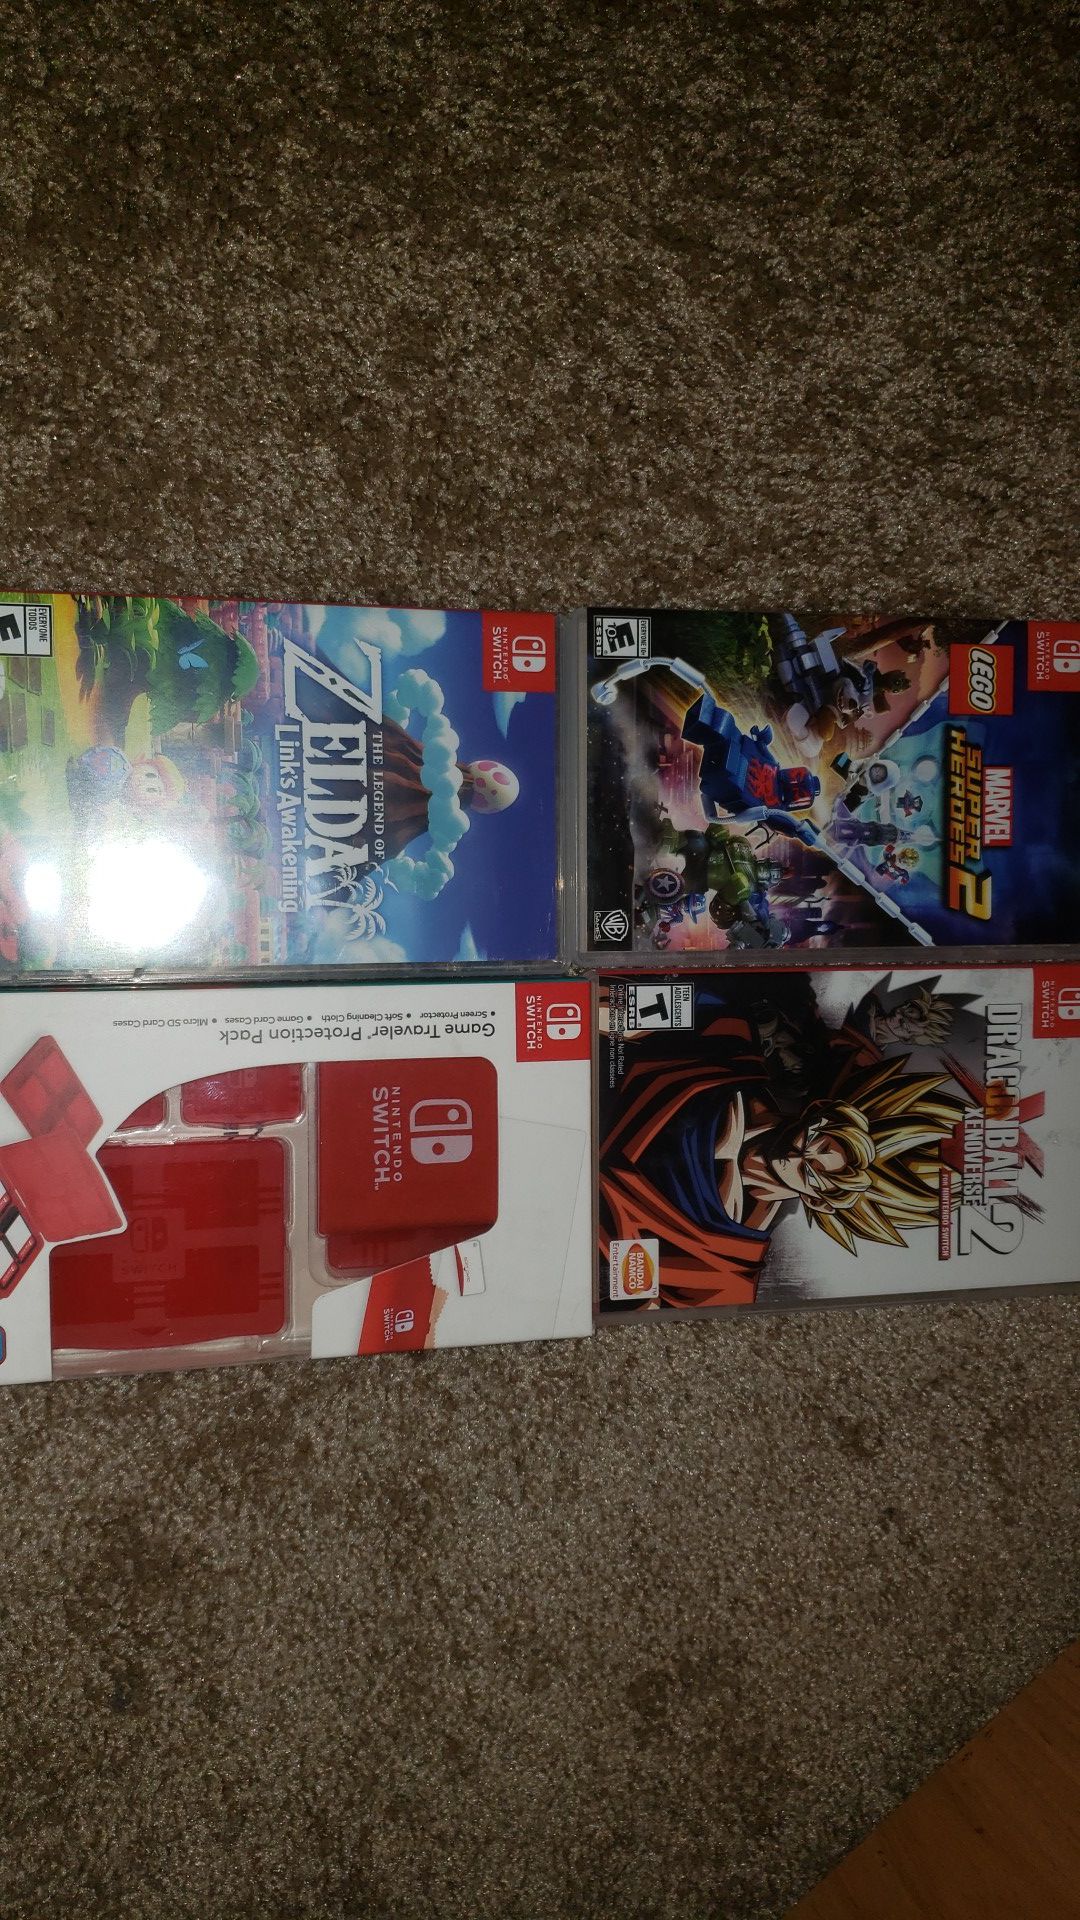 Nintendo switch games and brand new protection pack. Used Nintendo brand carrying case in good condition.